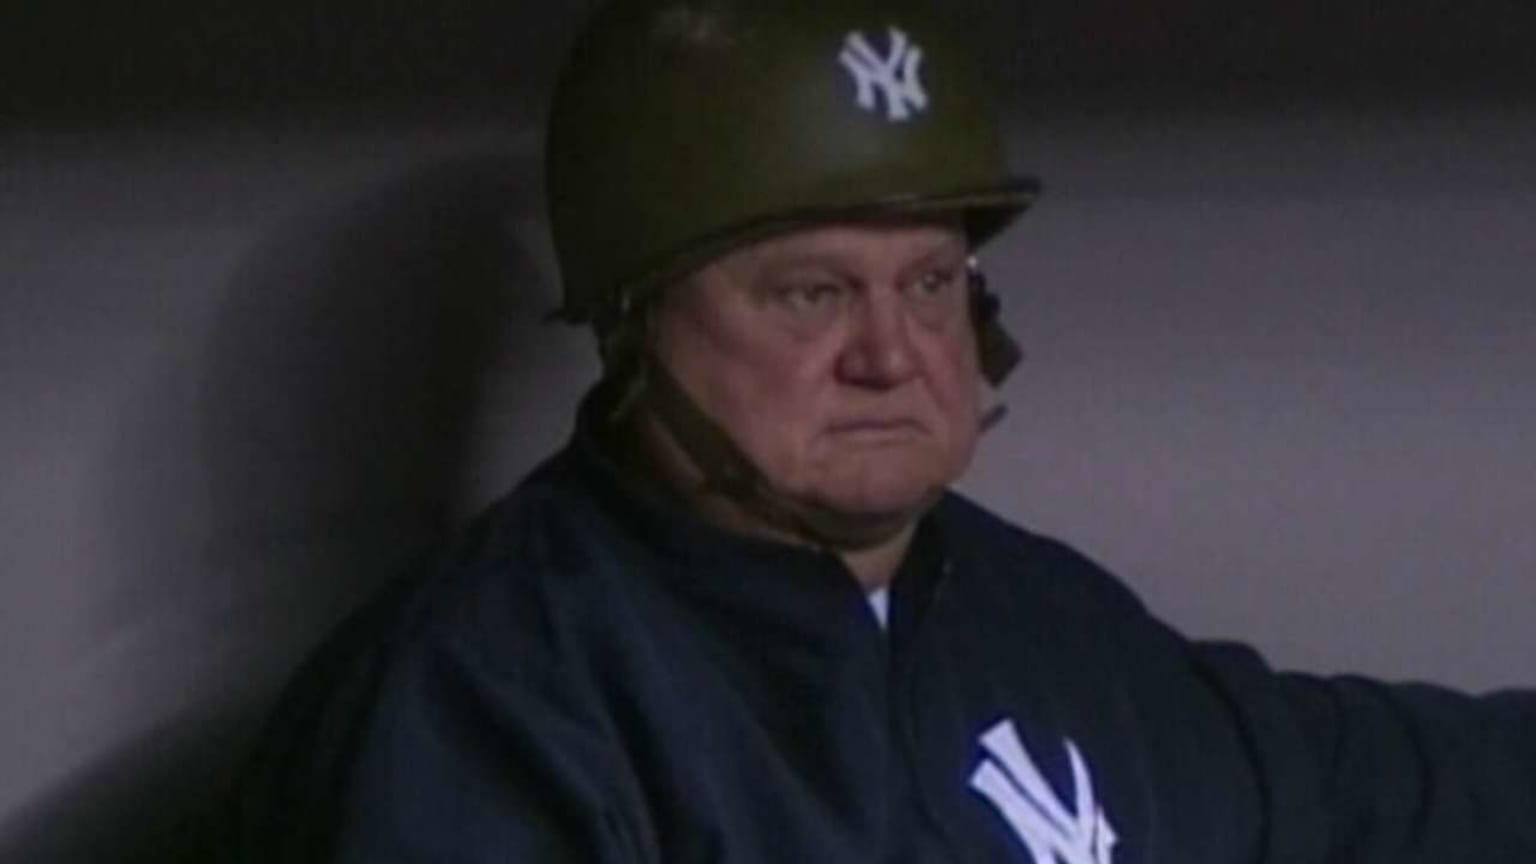 We Loved Him': Yankees, MLB Mourn Icon Don Zimmer - CBS New York